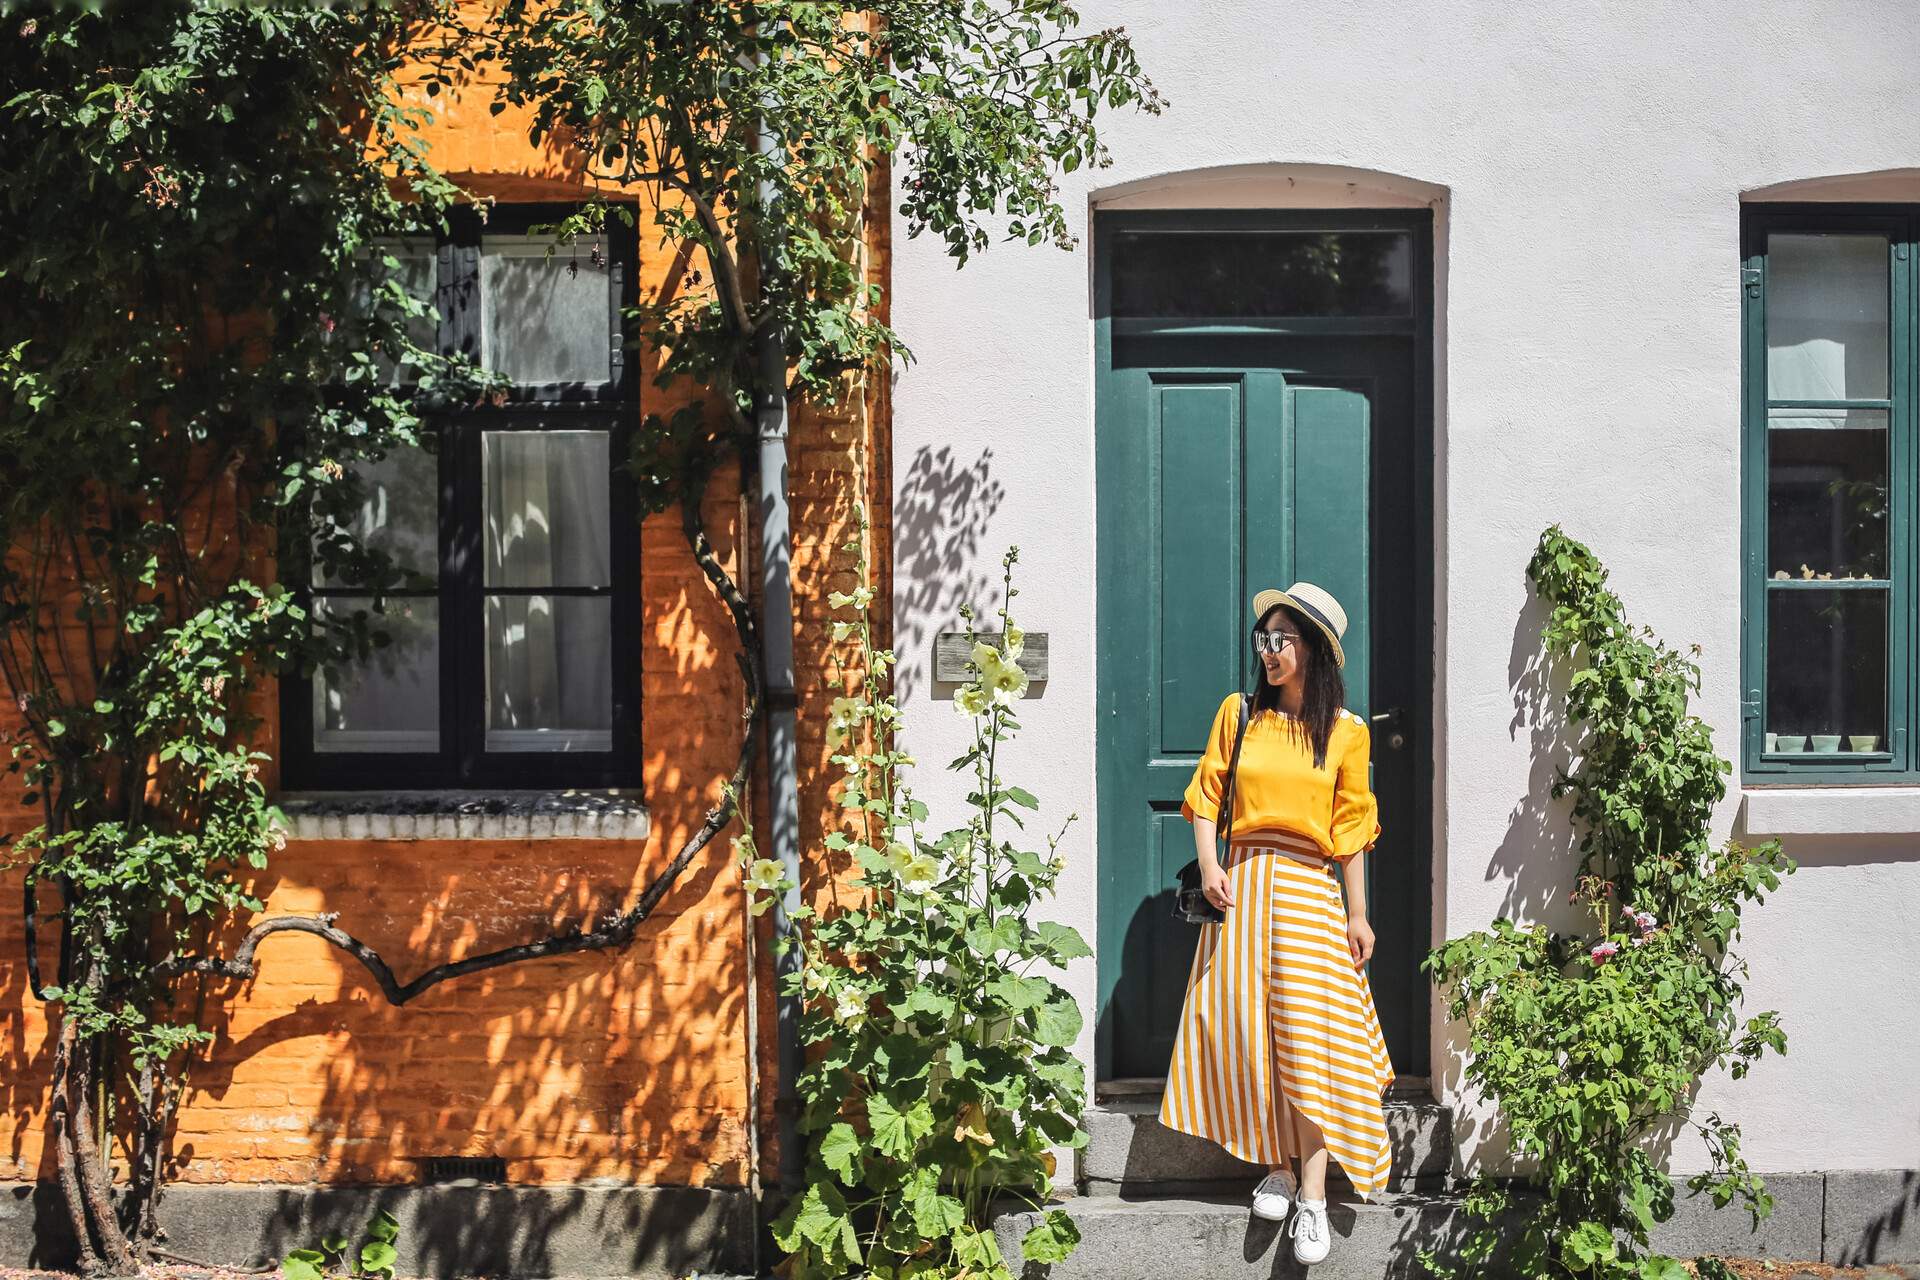 A smiling young lady steps down in front of a green door on a sunny day.